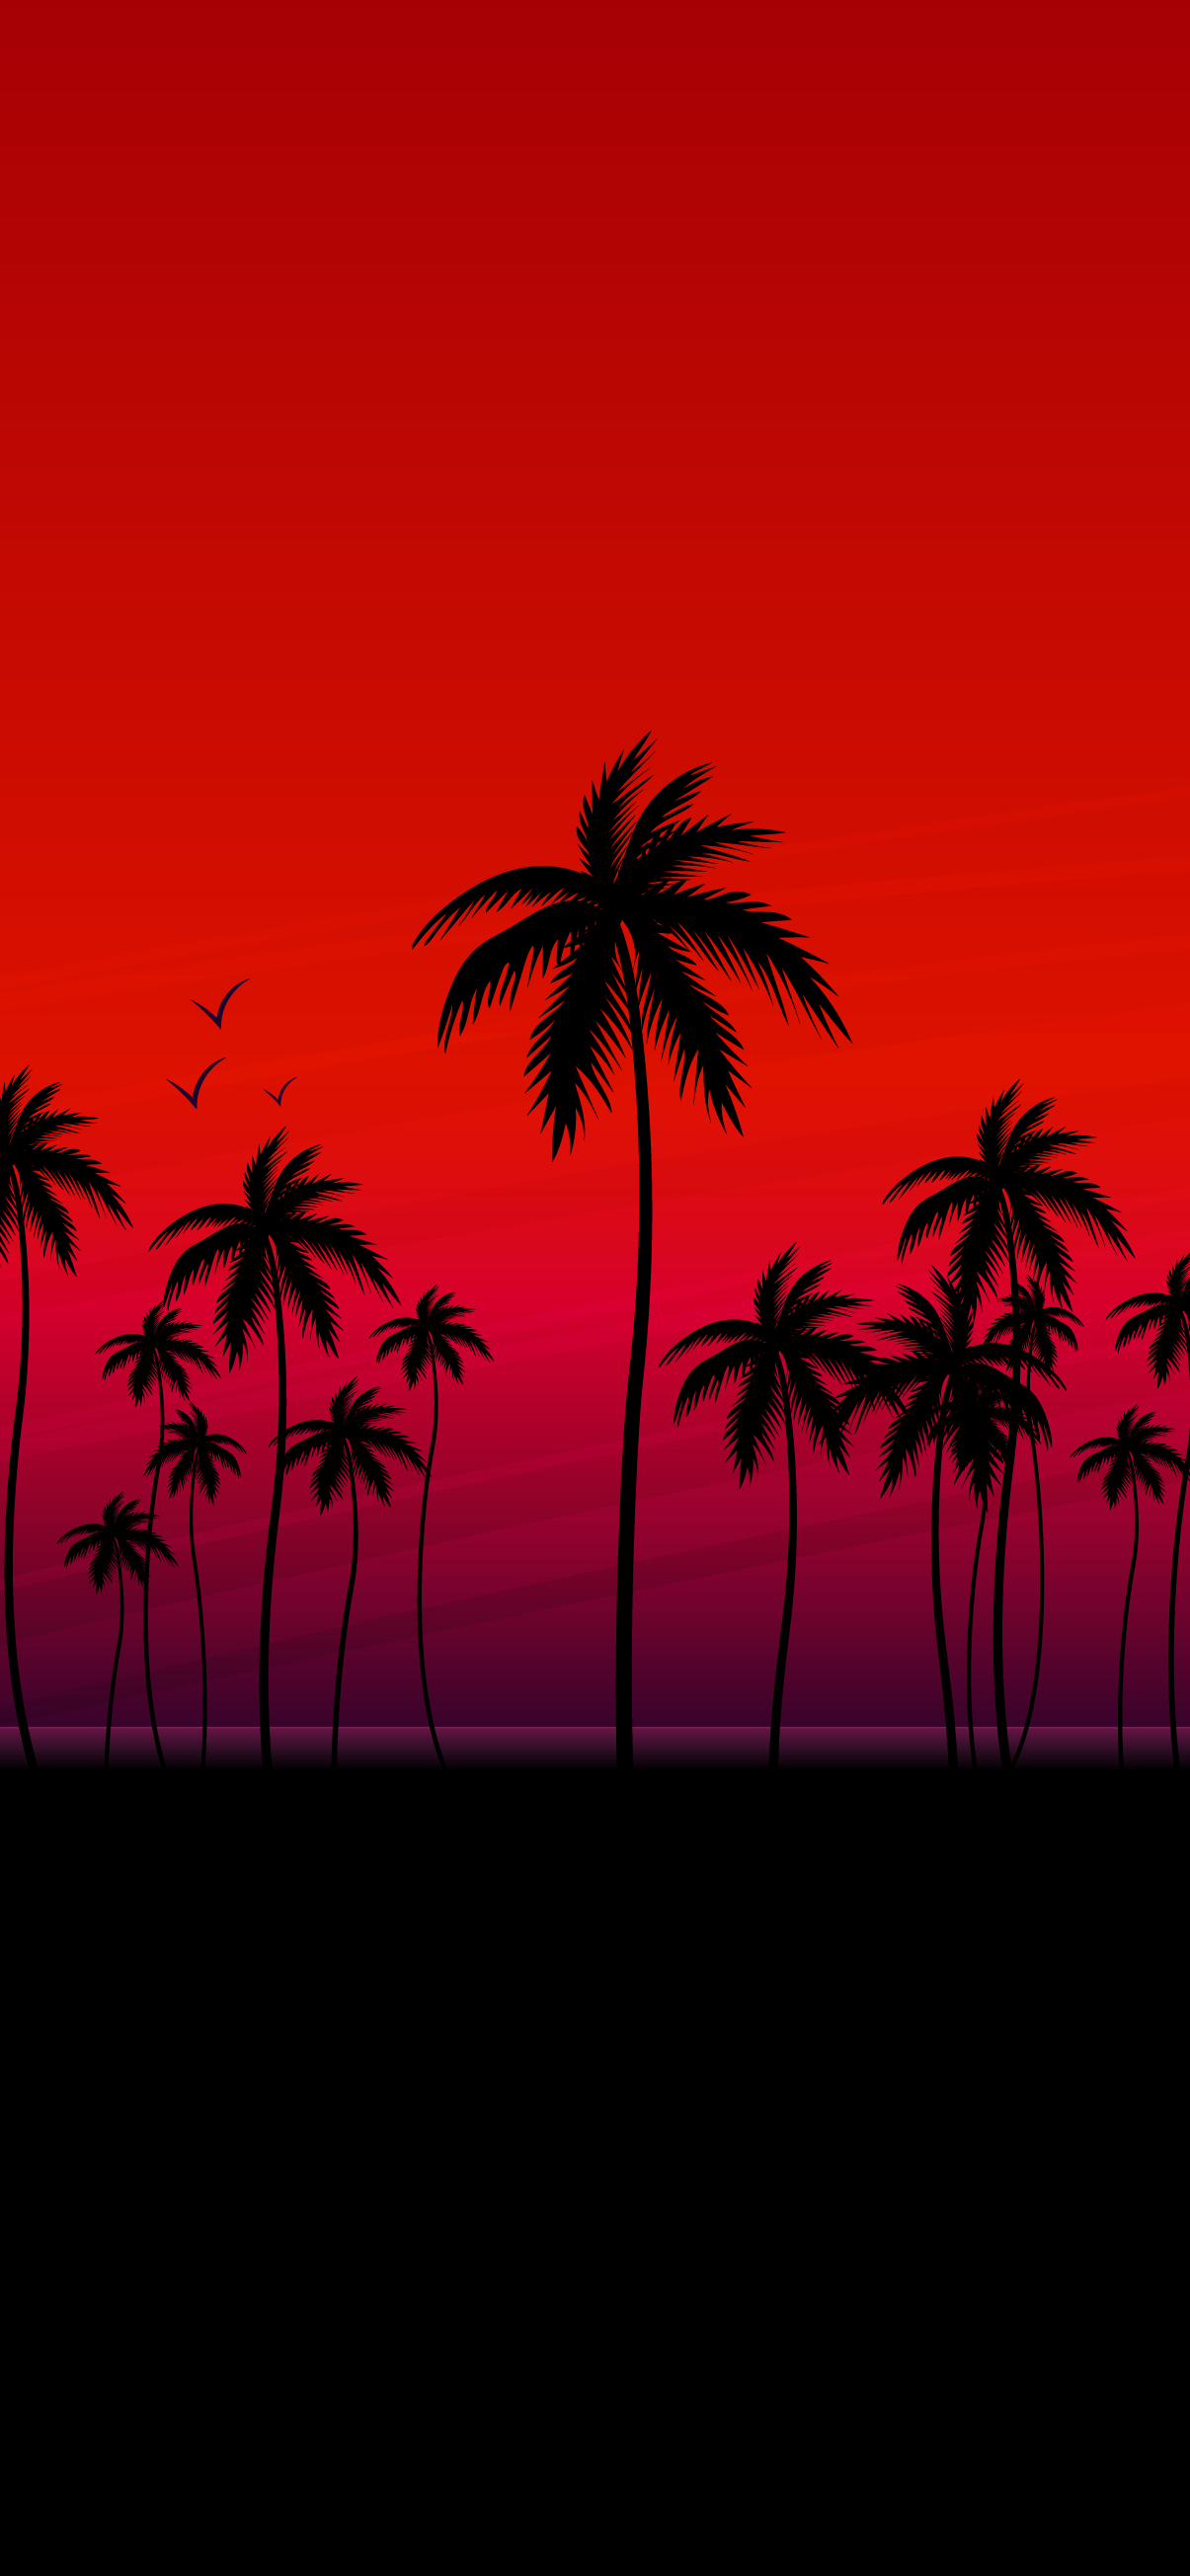 RED OLED PALMS AESTHETIC WALLPAPER PHONE HD 4K